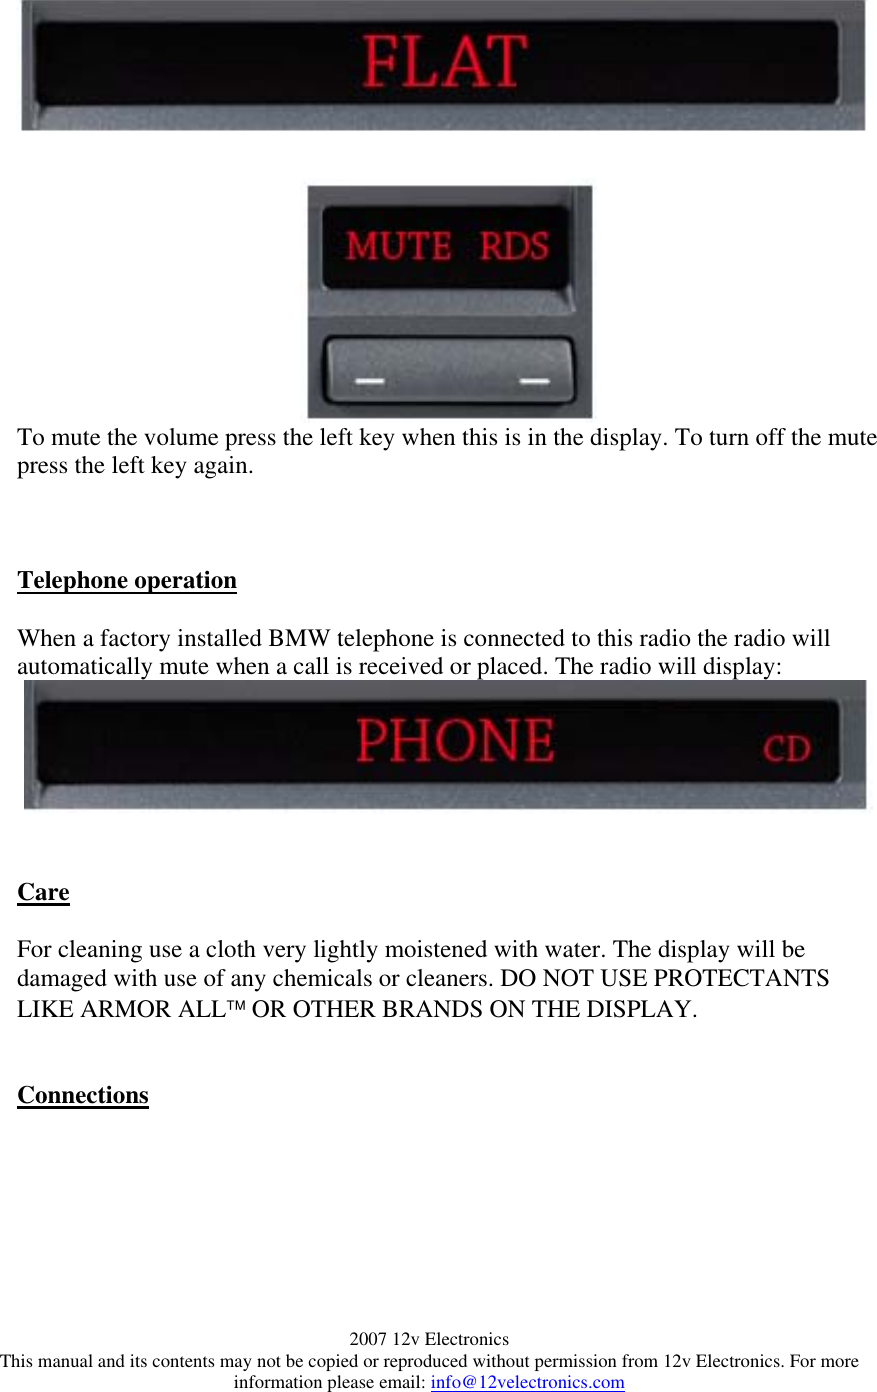 Page 7 of 9 - Bmw Bmw-Cd43-Users-Manual- CD43 USERS MANUAL  Bmw-cd43-users-manual